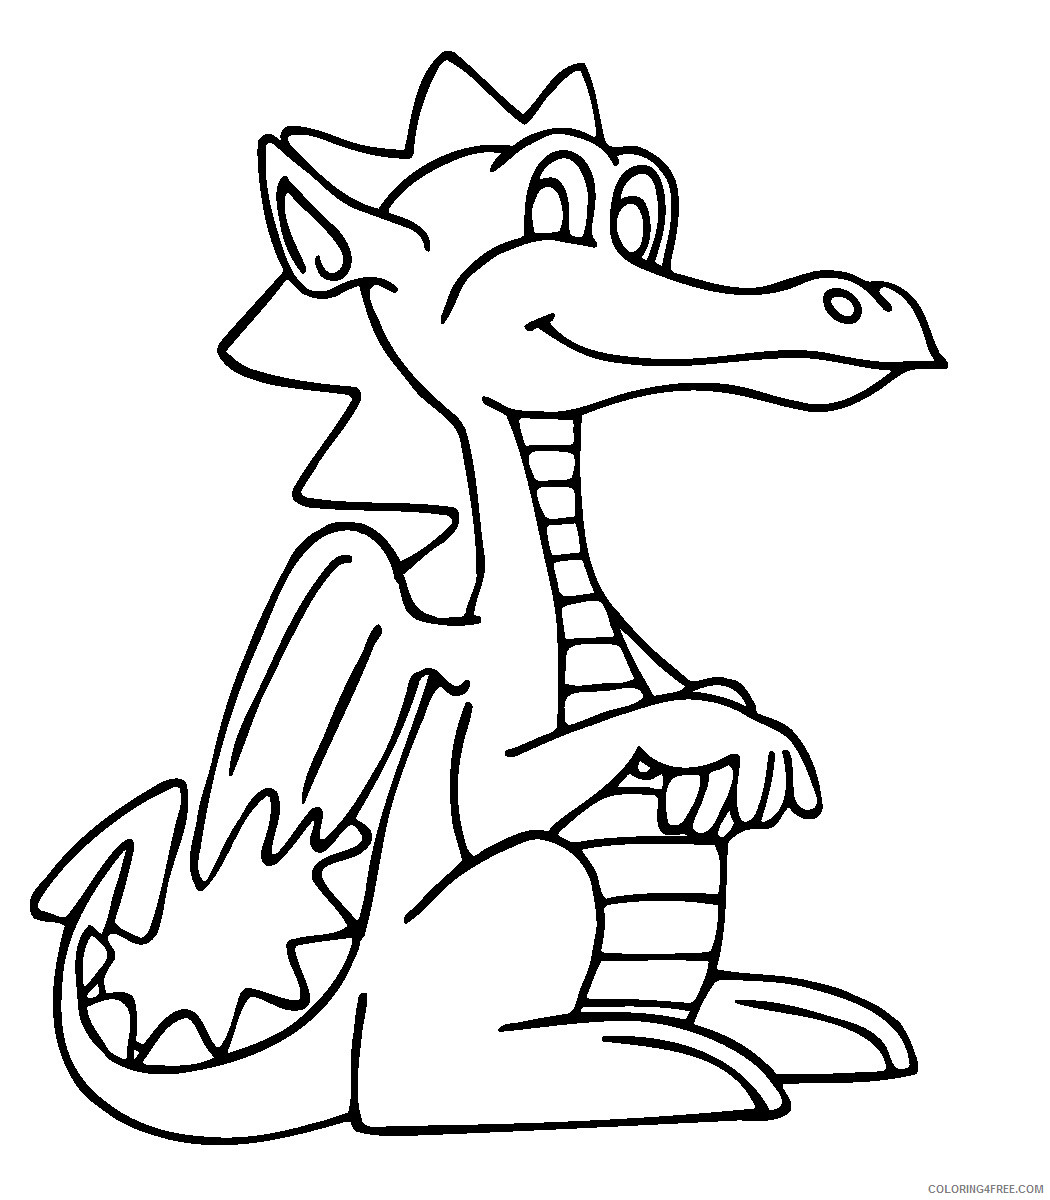 Black and White Dragon Coloring Pages 28 dragon images V0Iziz clipart Printable Coloring4free